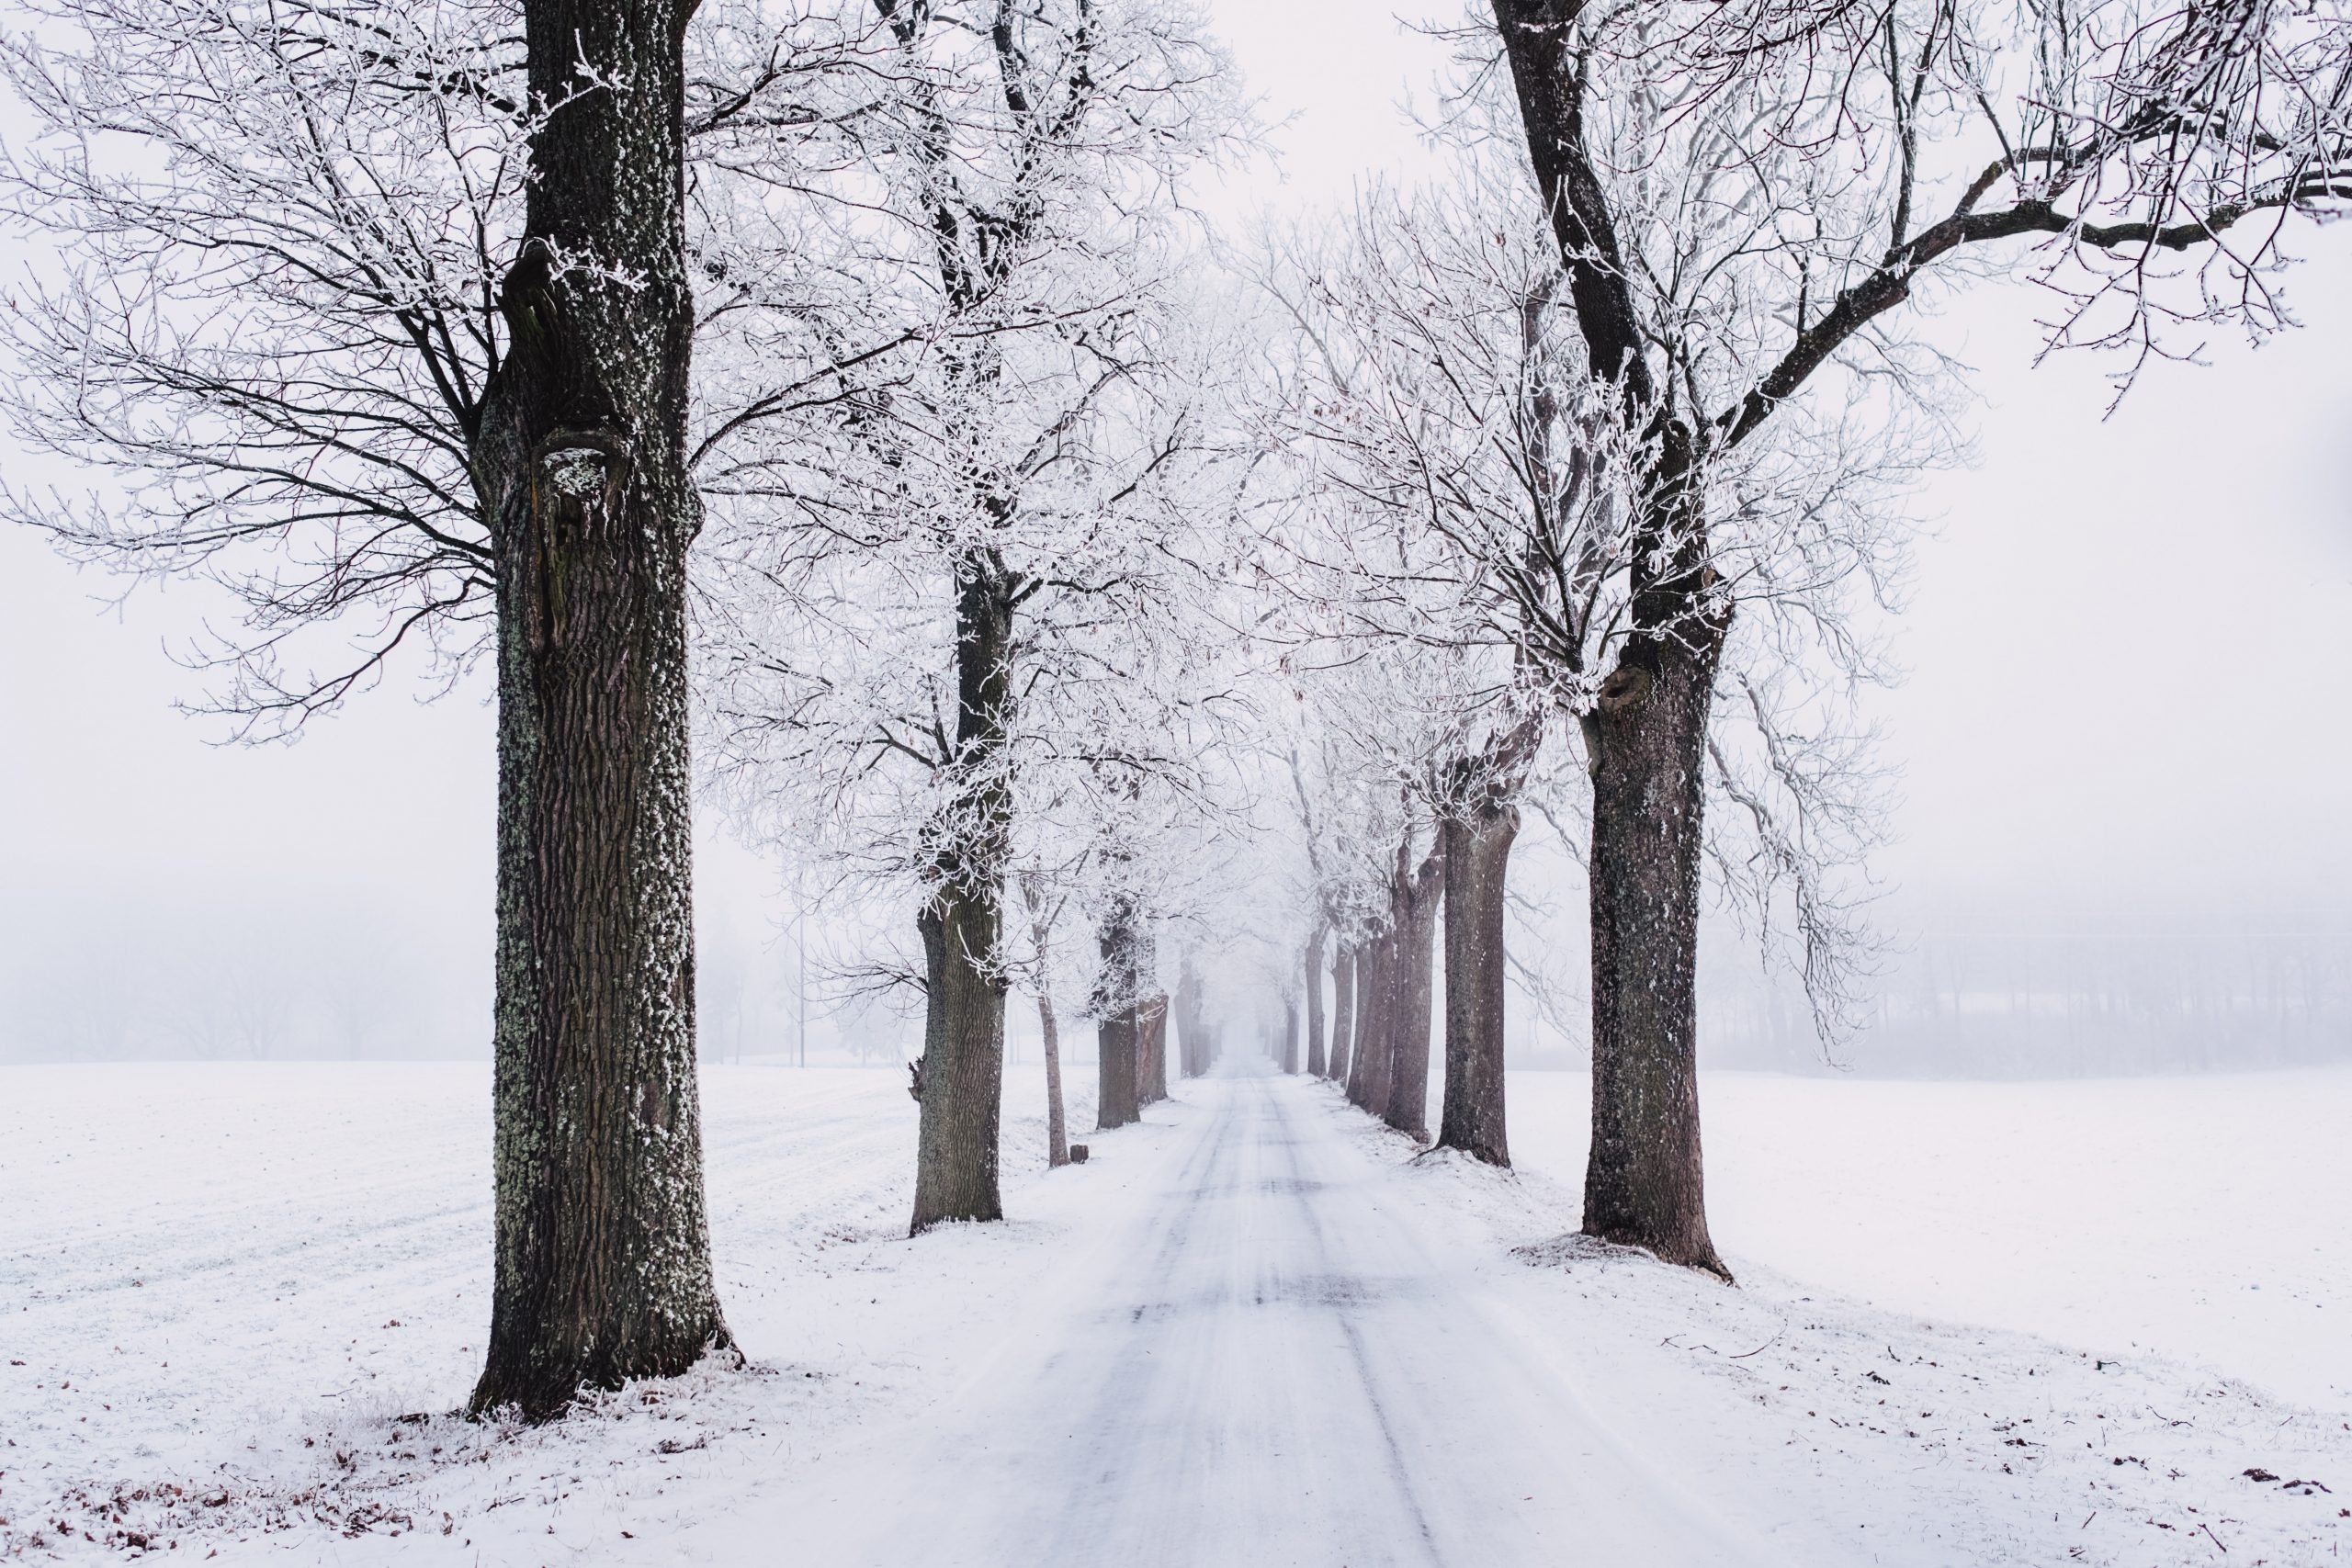 snowy-pathway-surrounded-by-bare-tree-839462